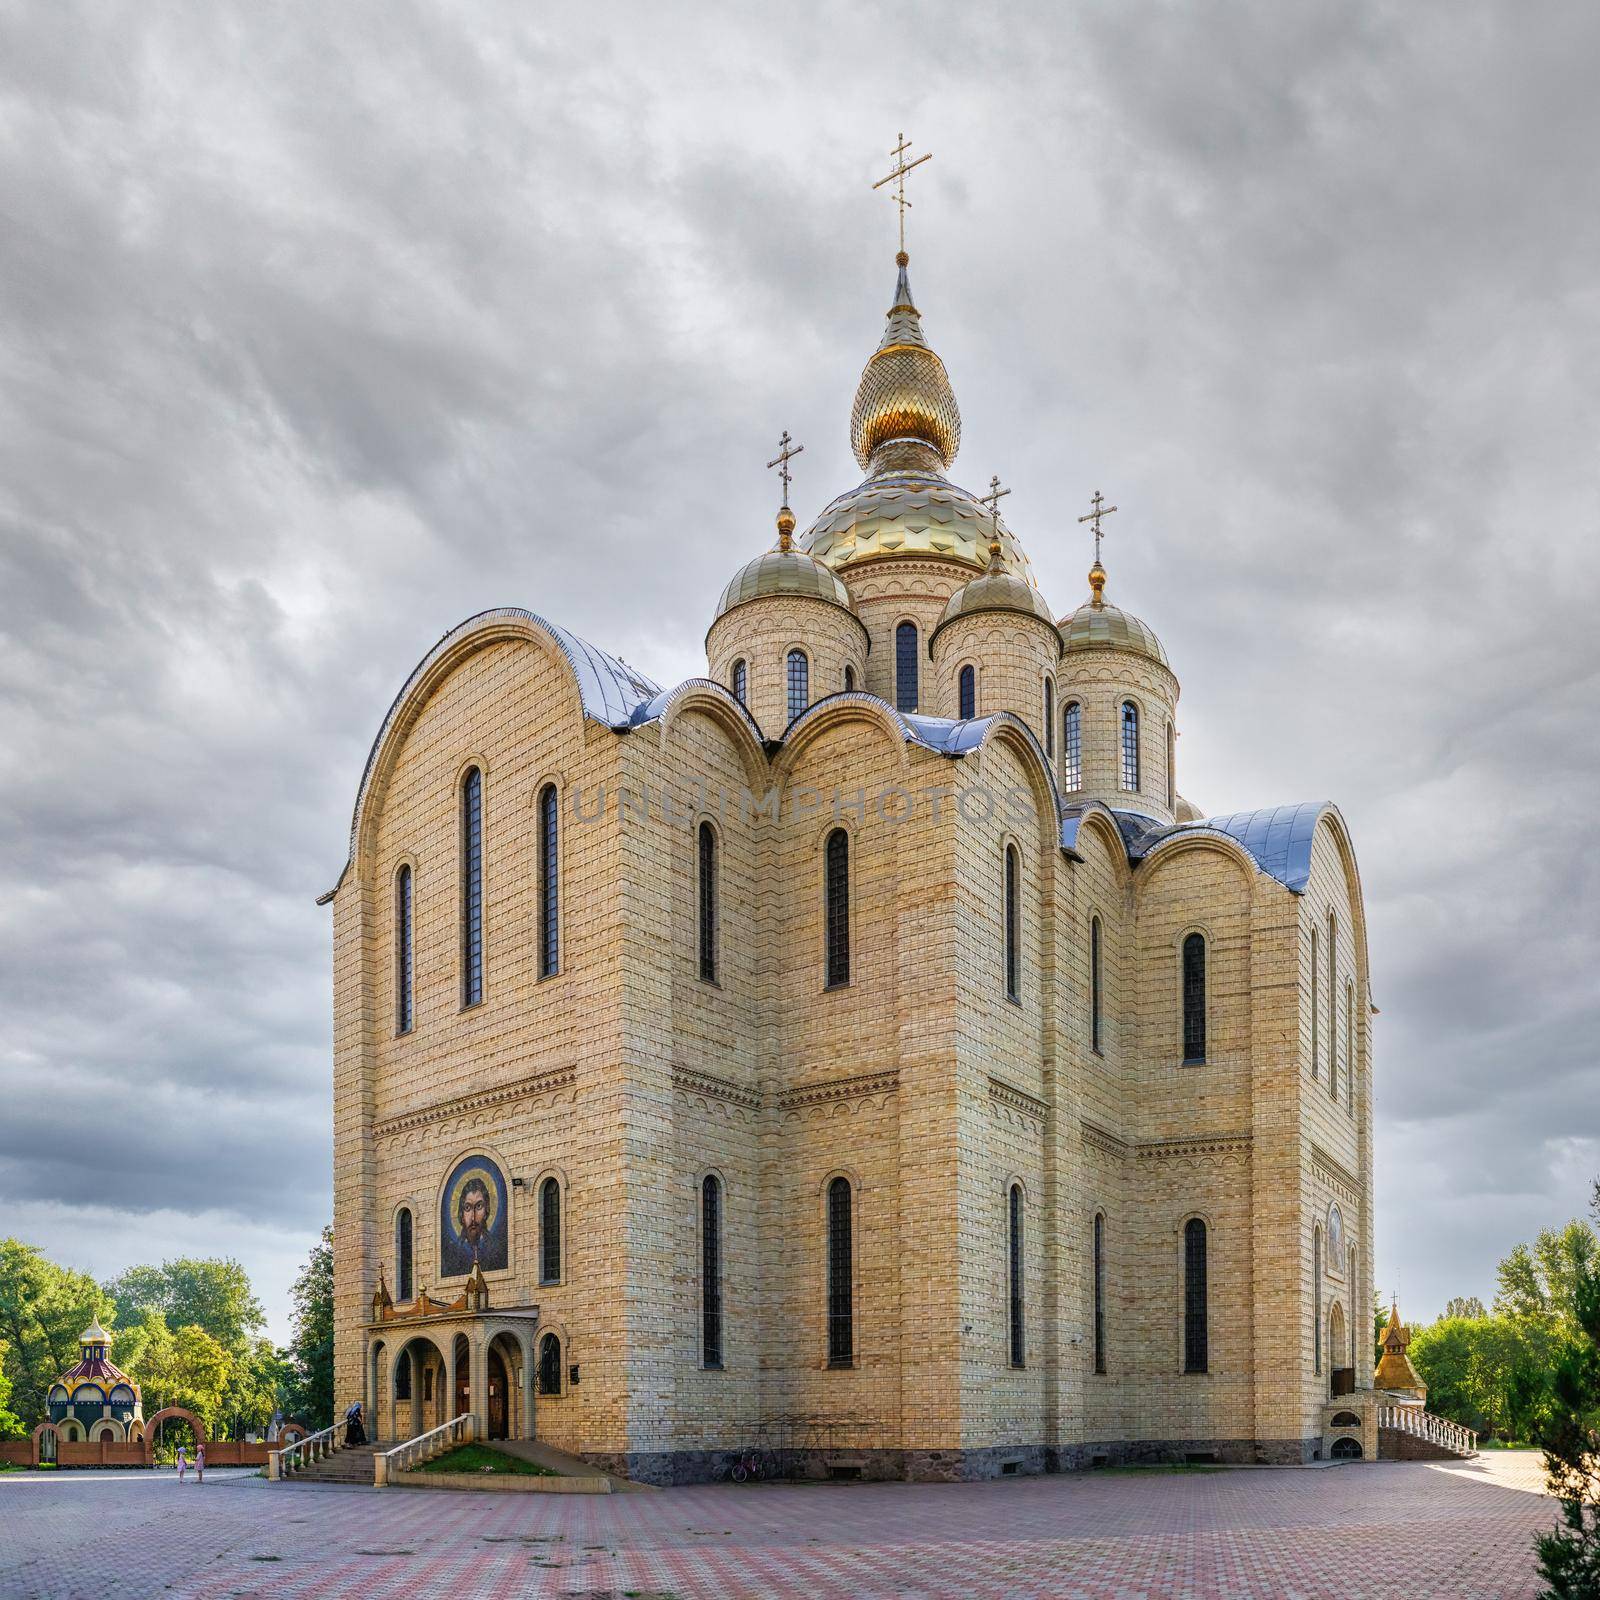 St. Michaels Cathedral in Cherkasy, Ukraine by Multipedia